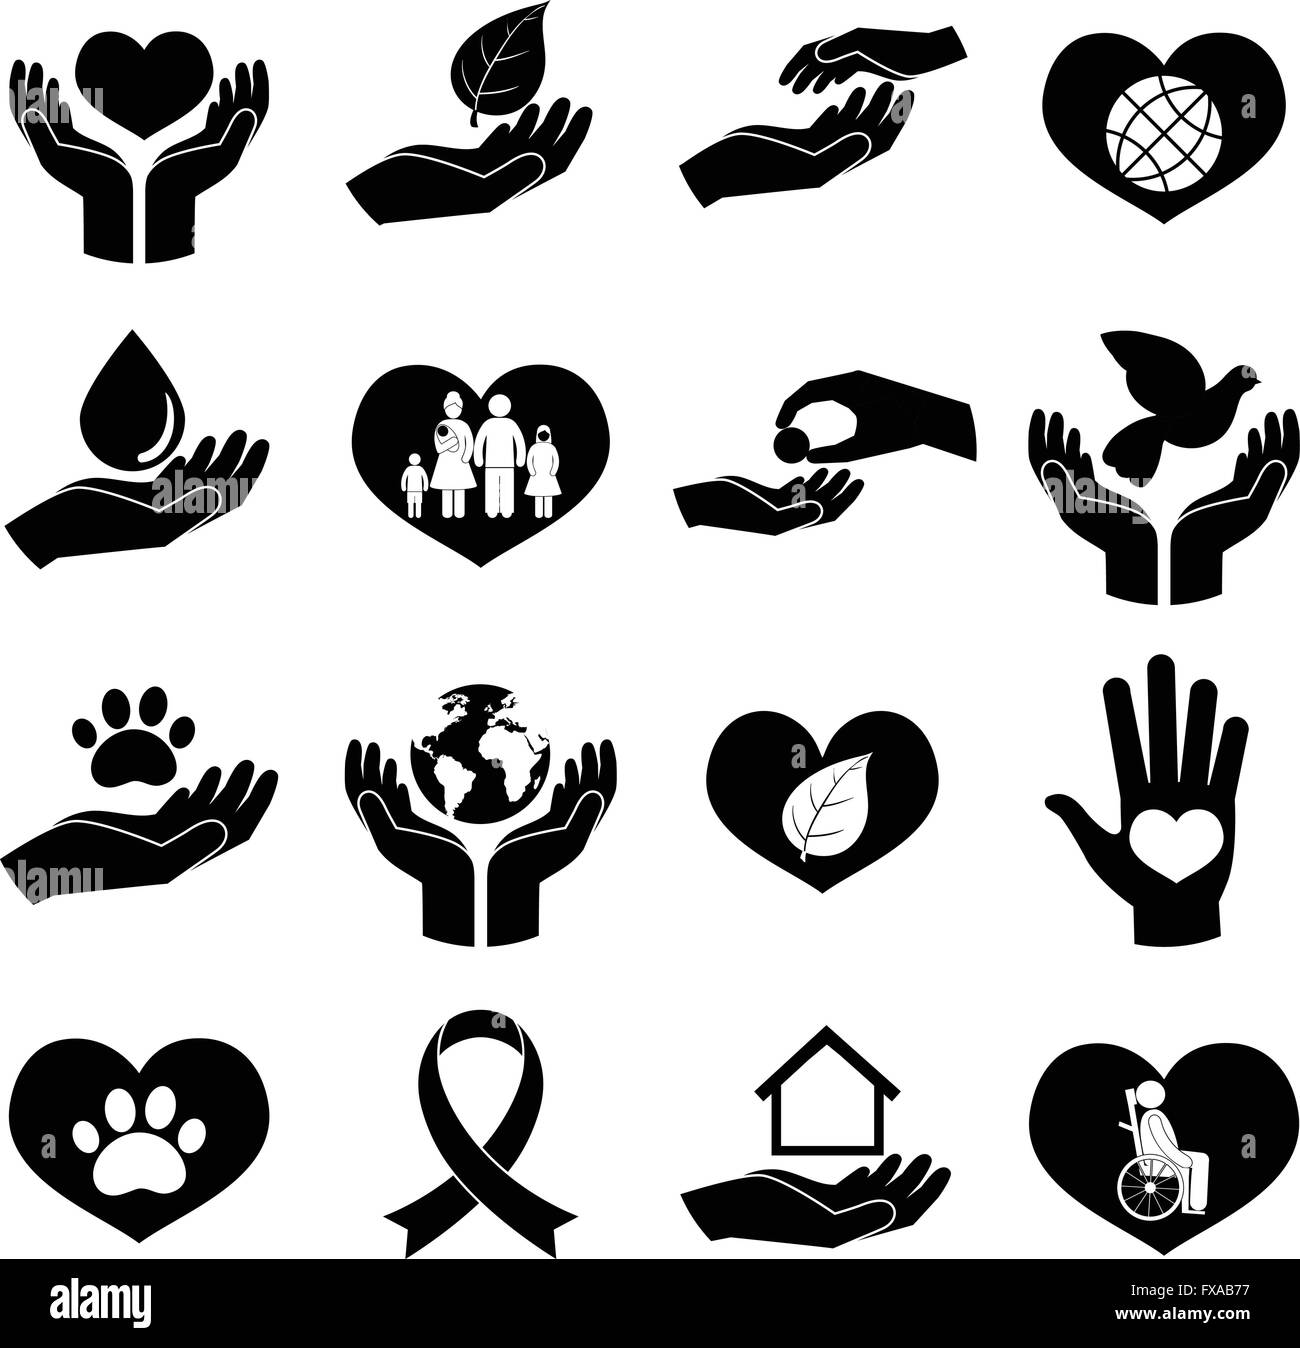 Charity and Donation Icons Black Stock Vector